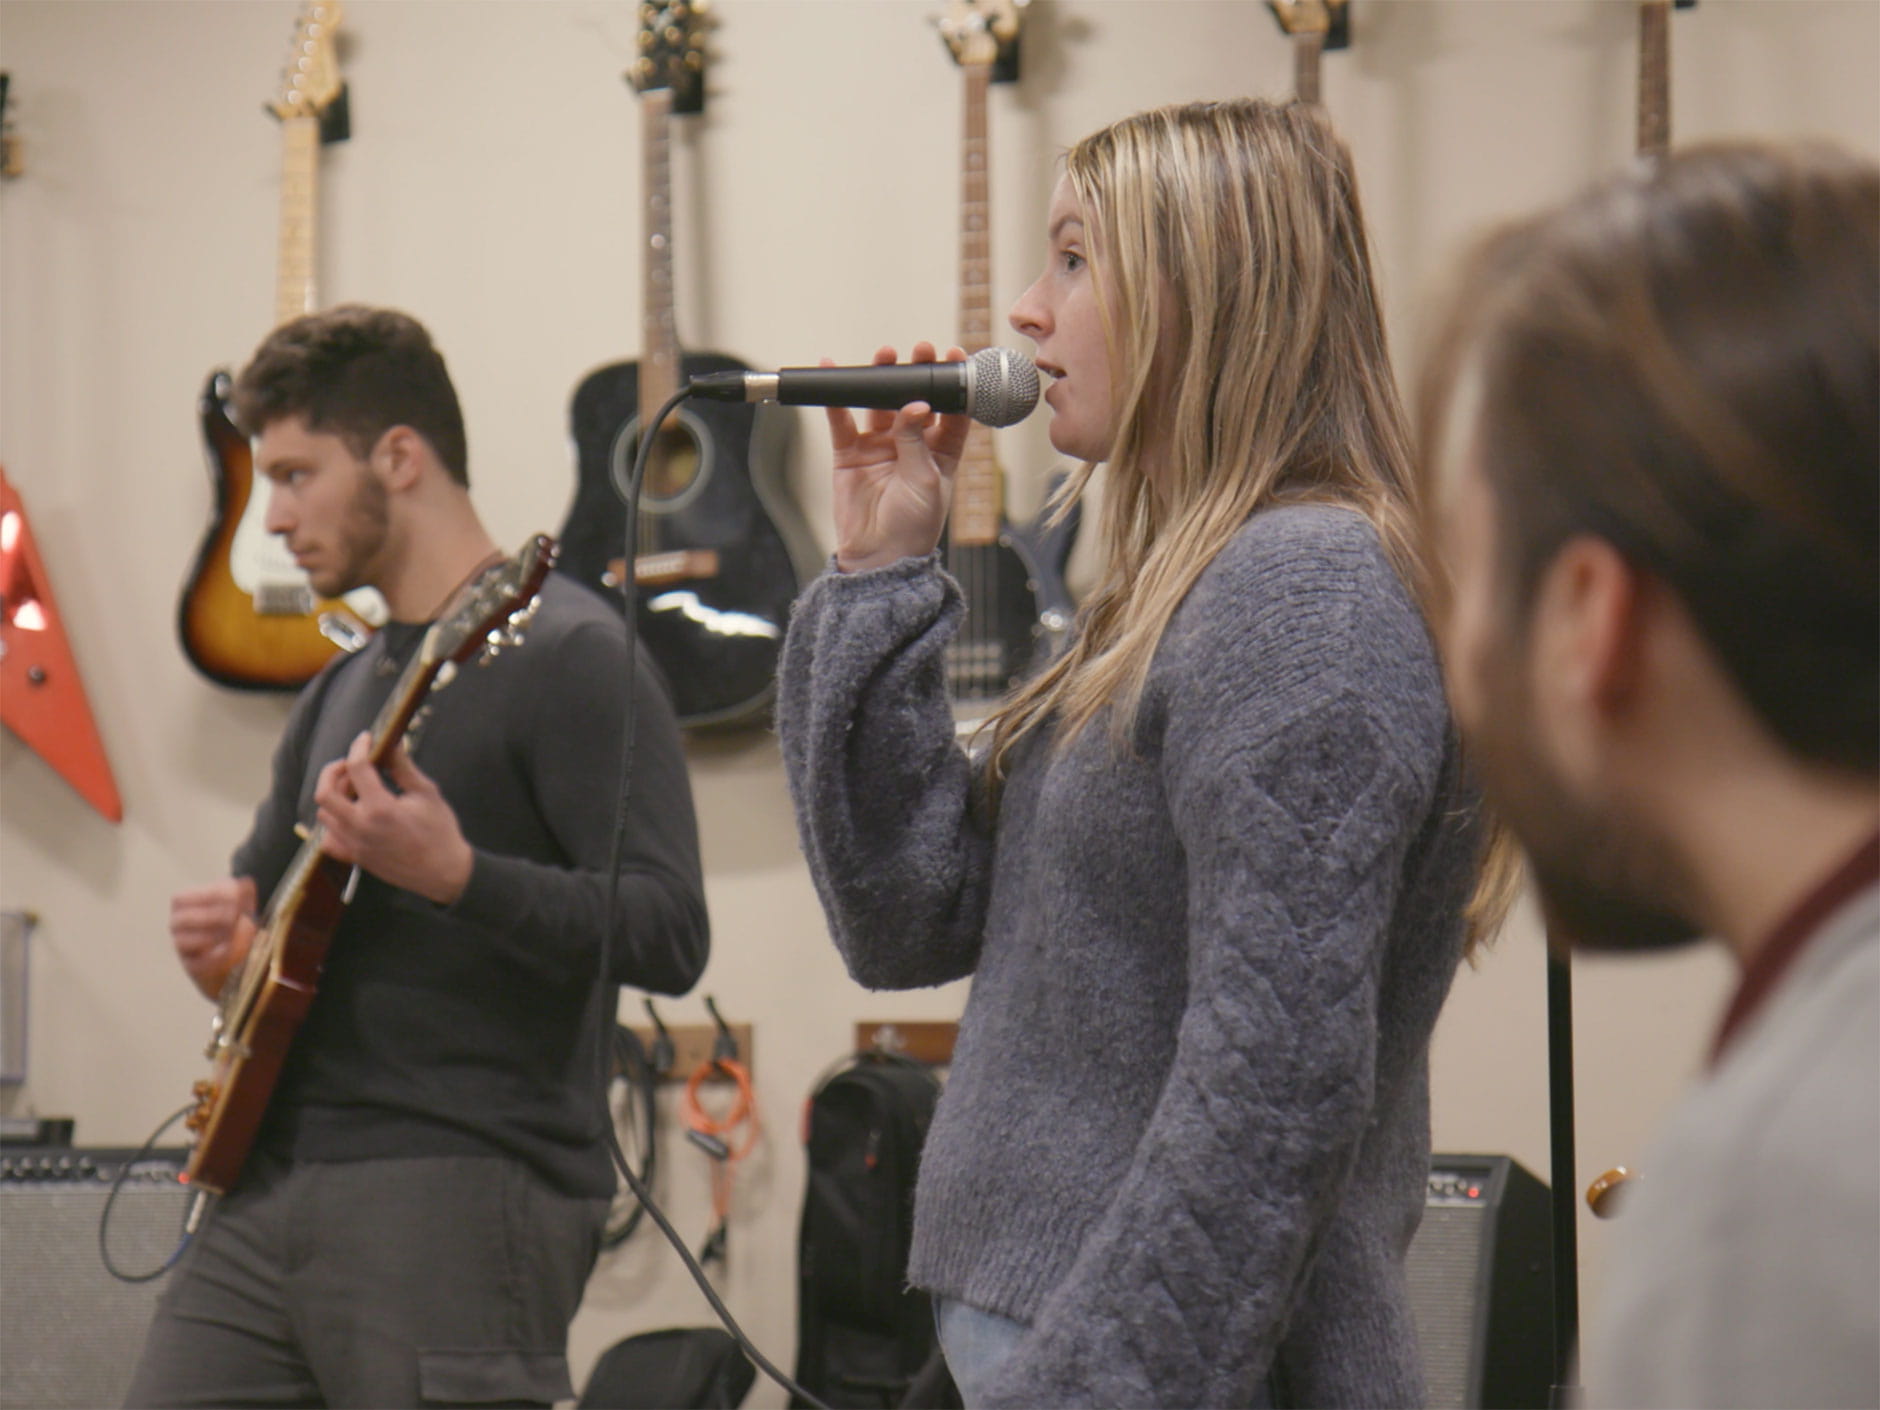 With Endicott’s Modern Band Project, students of all majors and class years are learning new musical skills, while forming connections with each other in the process.